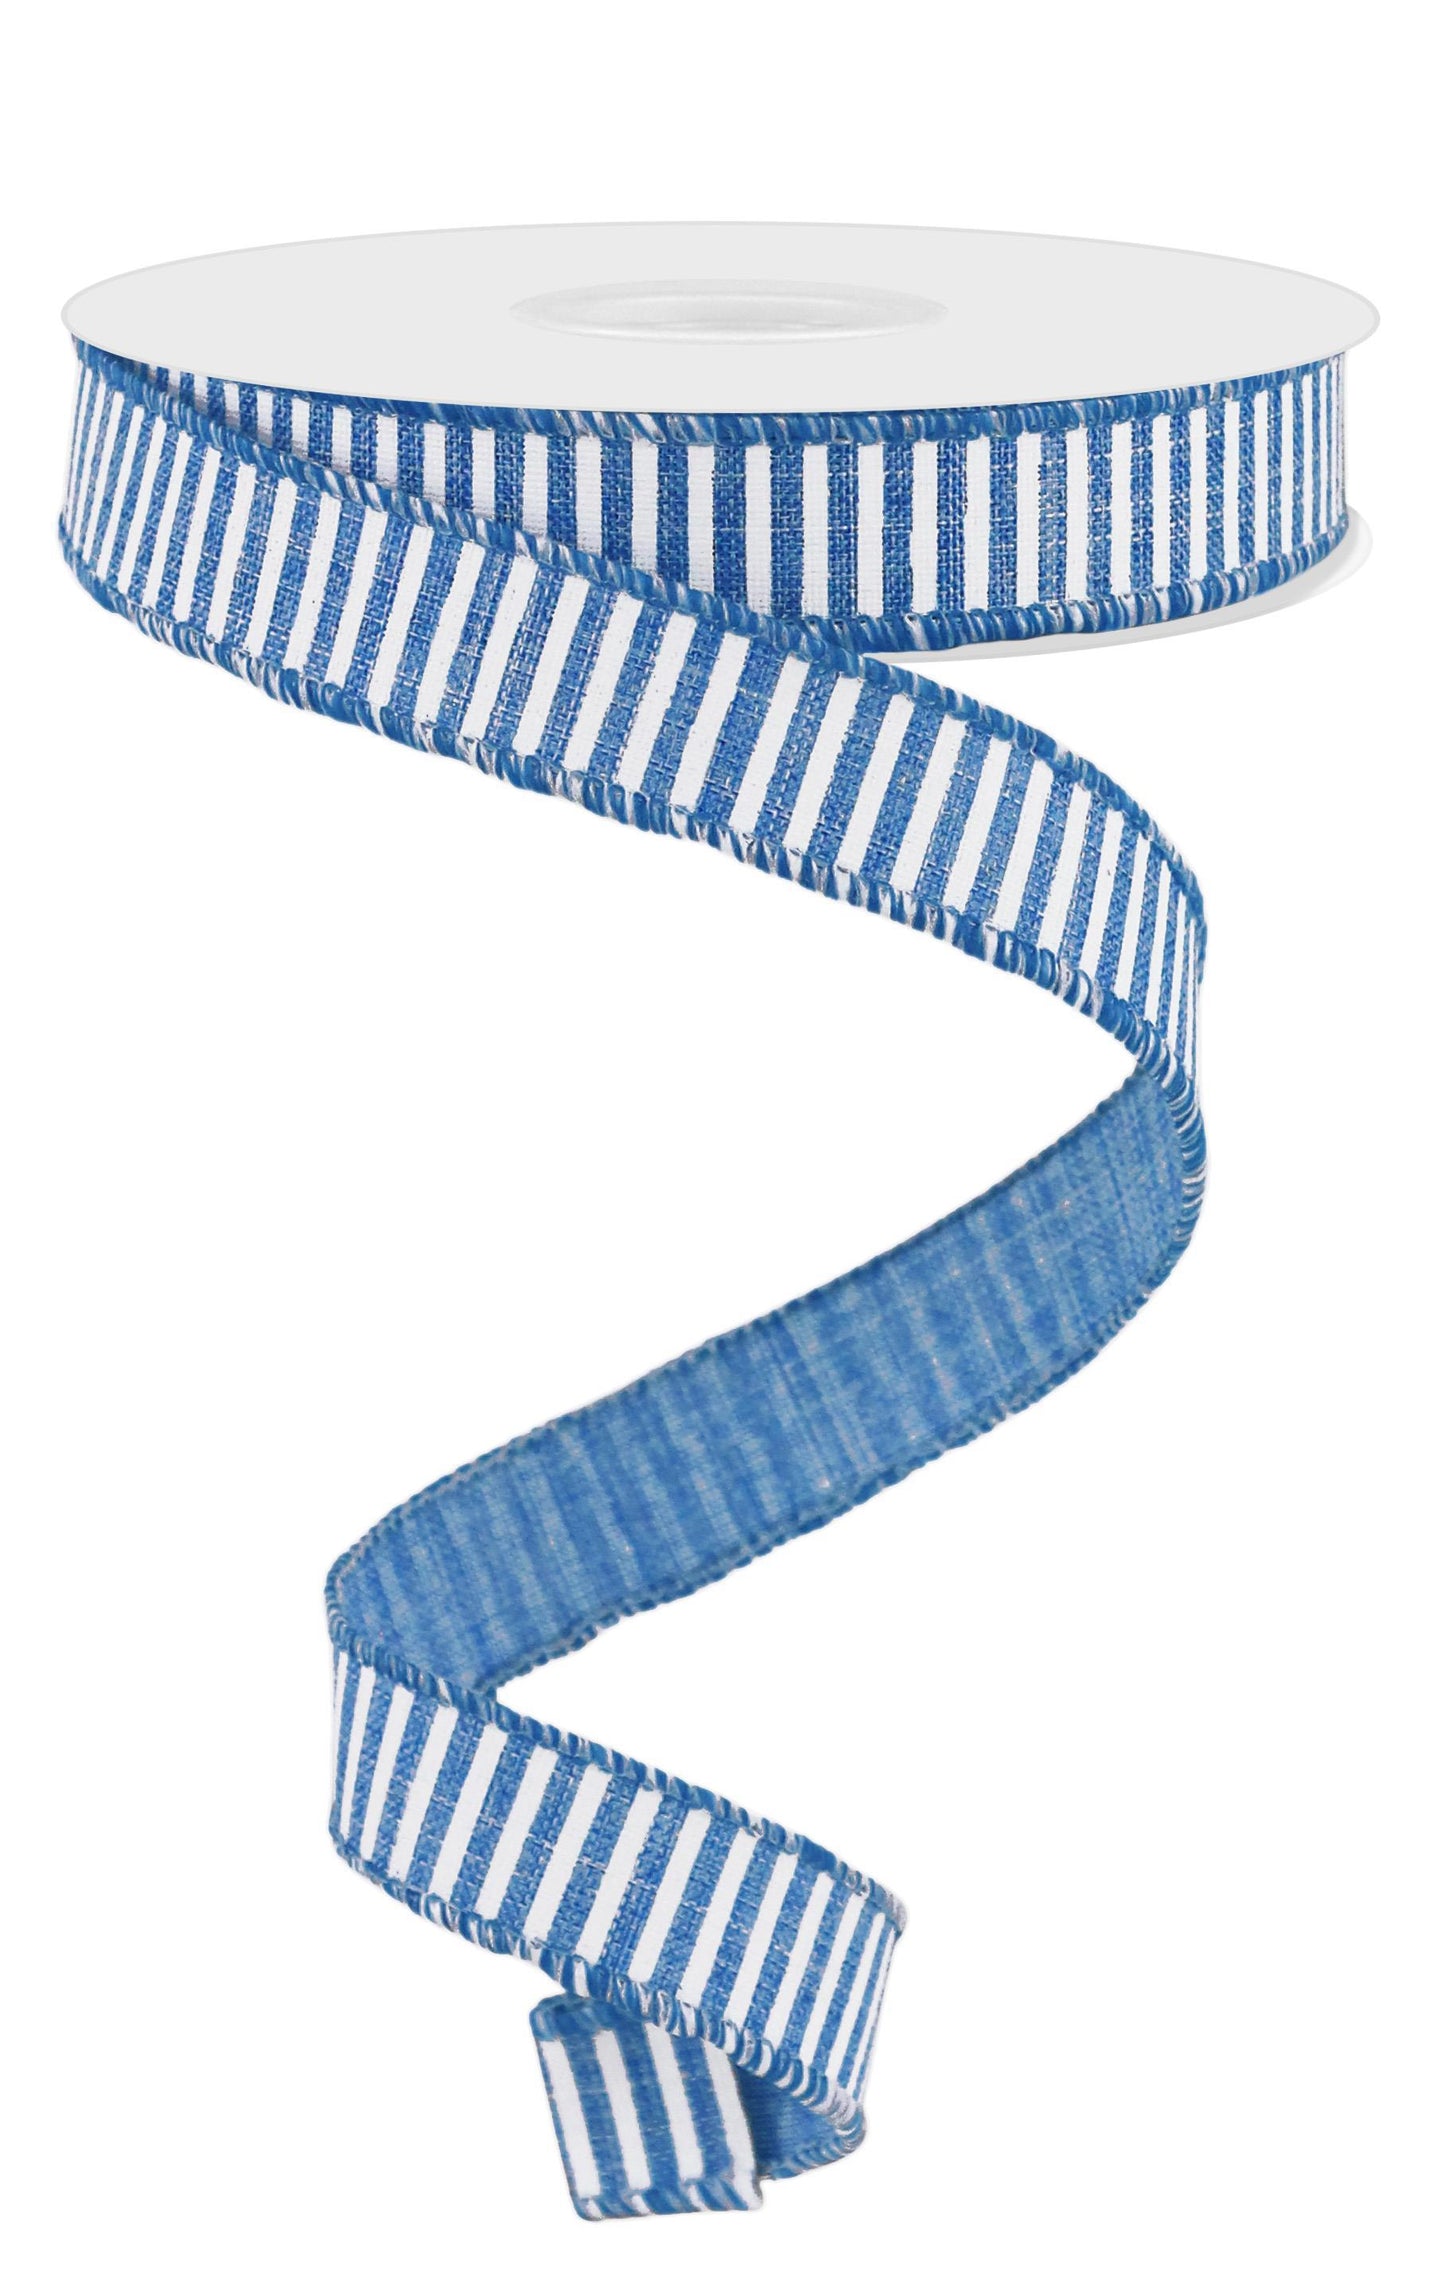 Wired Ribbon * Horizontal Stripes * Blue and White Canvas * 5/8" x 10 Yards * RGE126703